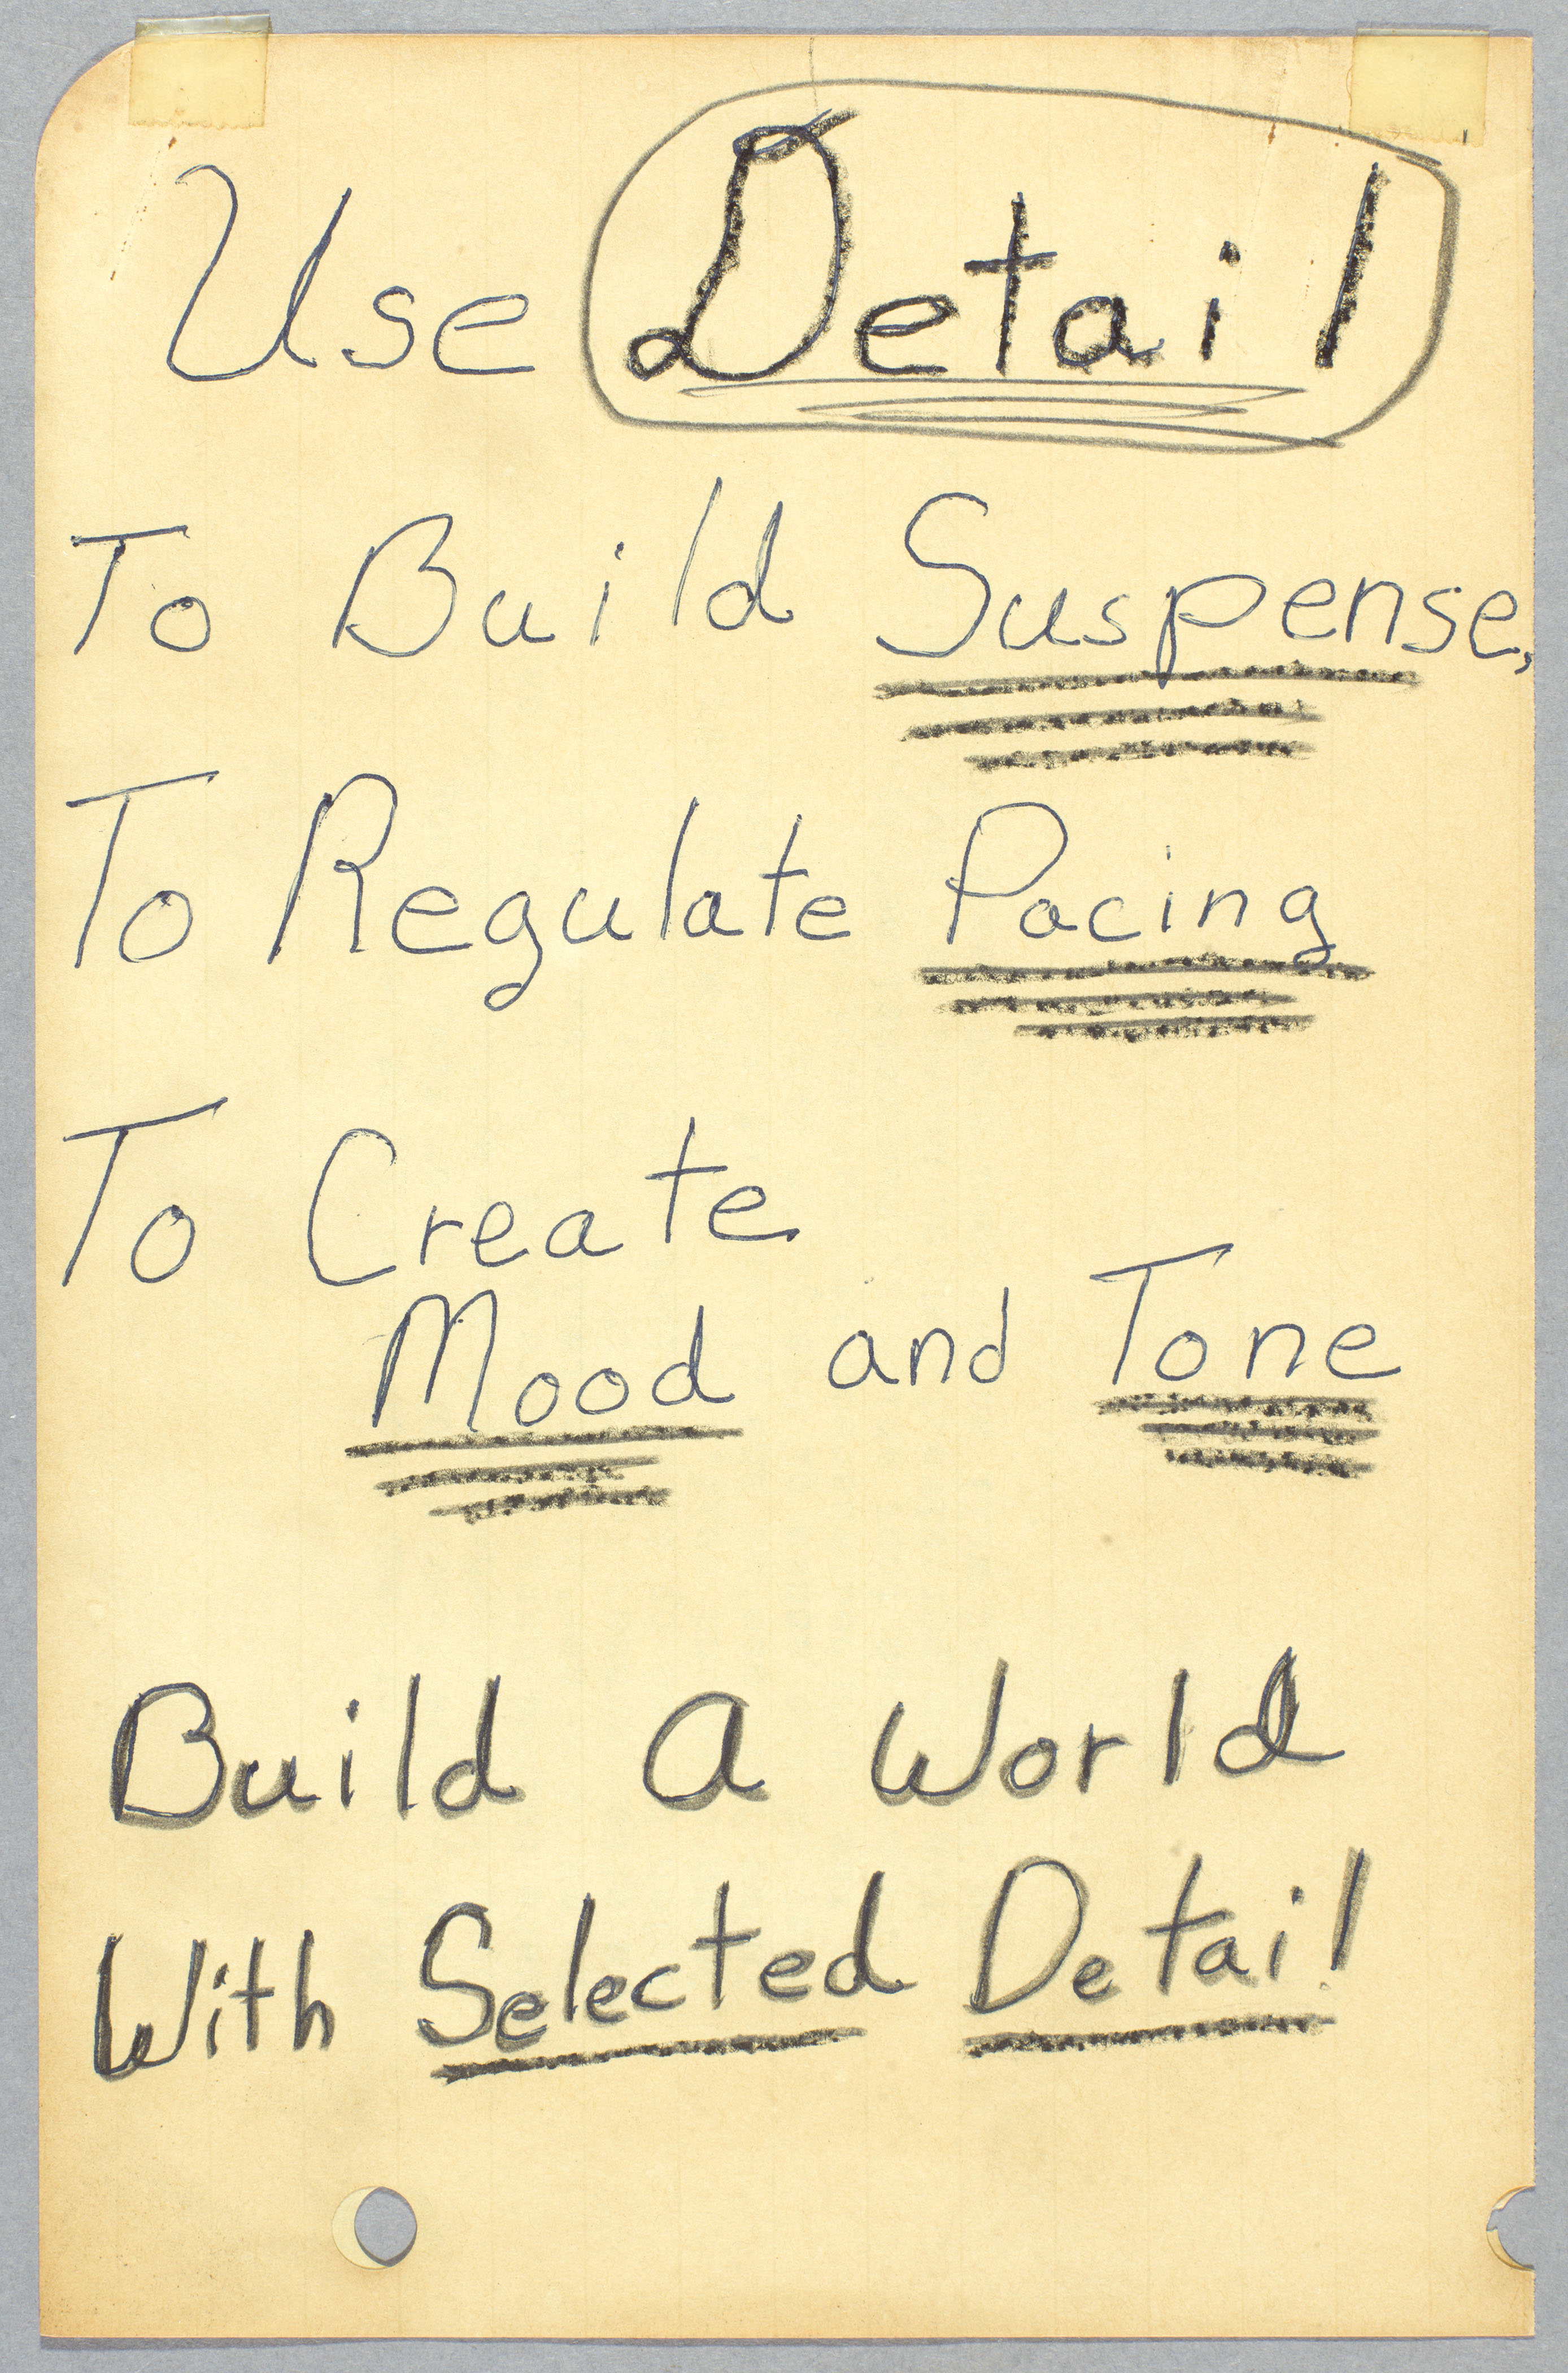 Octavia E. Butler, notes on writing, “Use detail…” ca. 1970-1995. The Huntington Library, Art Collections, and Botanical Gardens.